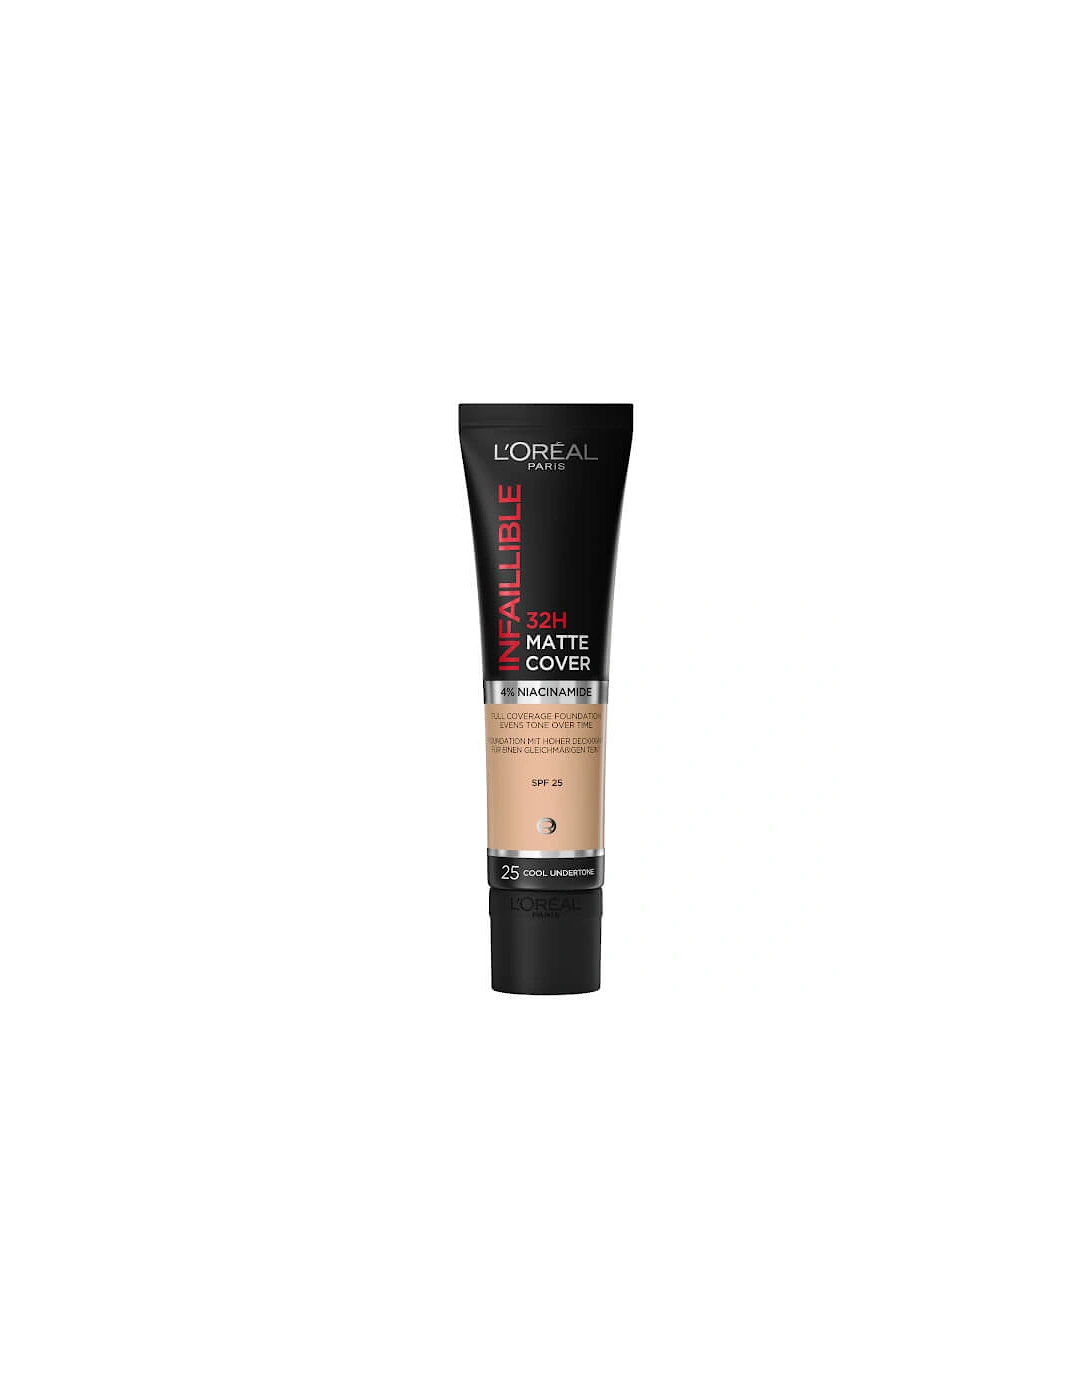 Paris Infallible 32hr Matte Cover Foundation - 25 Rose Ivory, 2 of 1